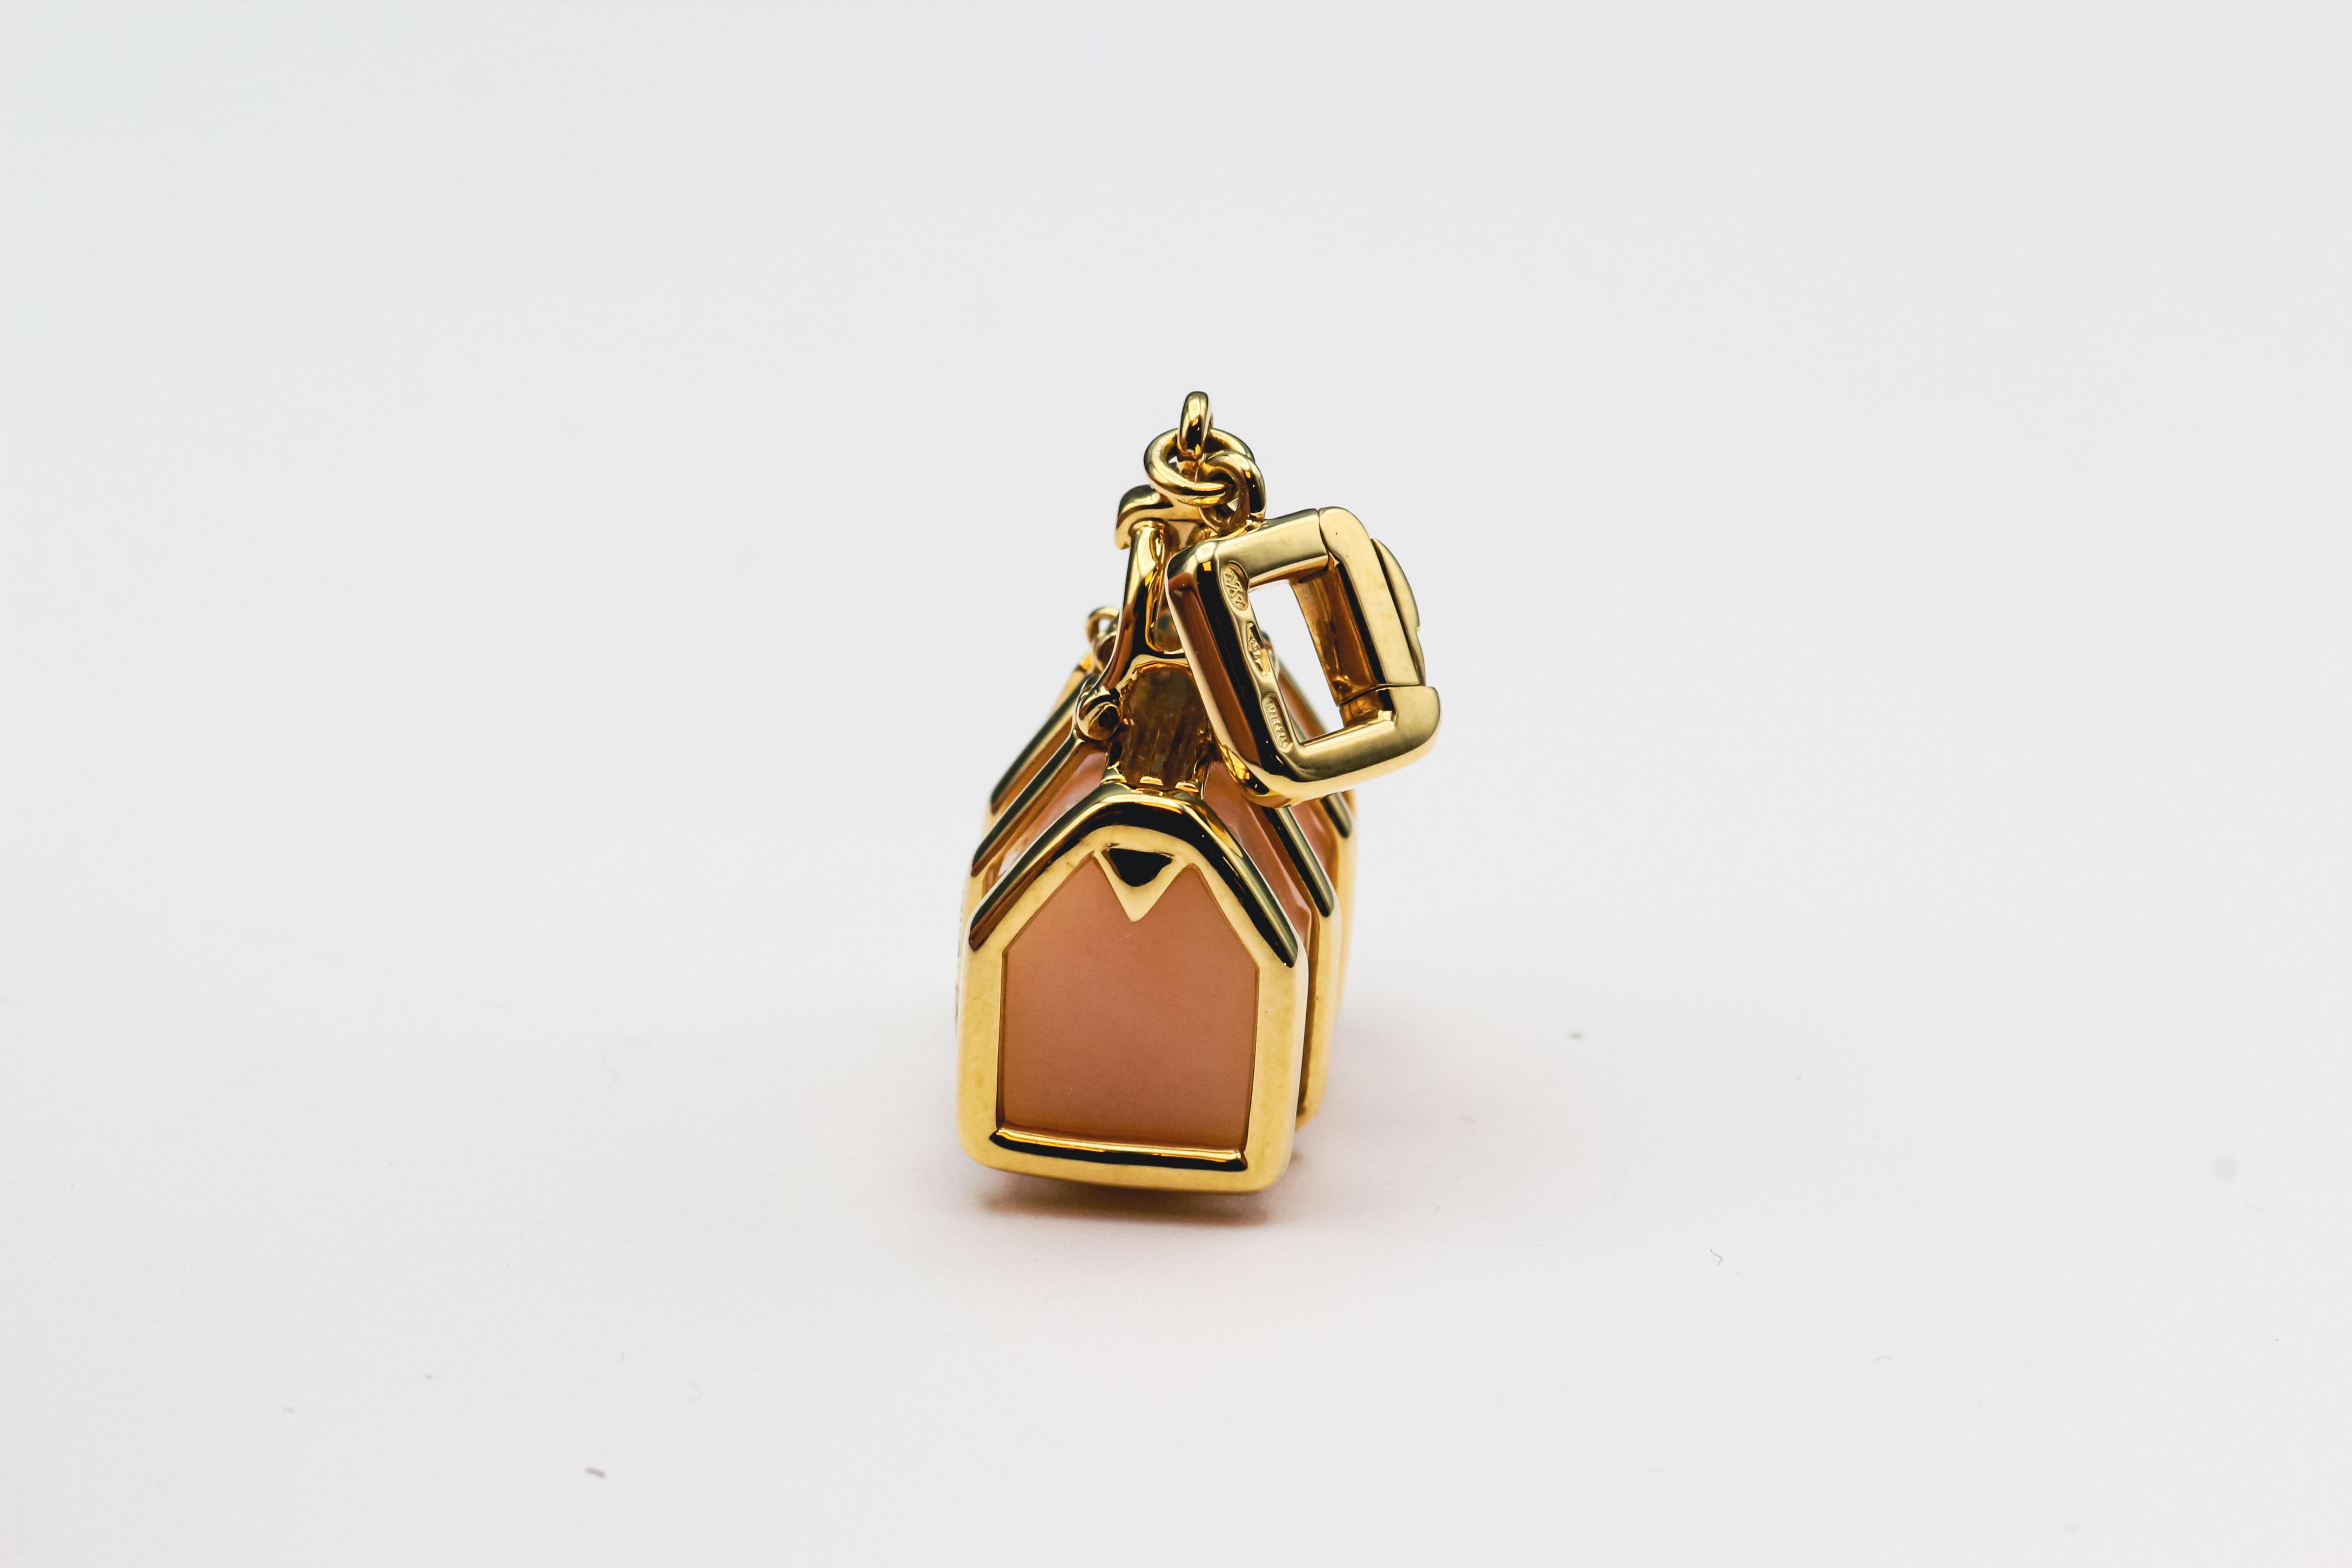 Louis Vuitton 18k Yellow Gold Rose Quartz Keepall Bag Charm Pendant In Excellent Condition For Sale In Bellmore, NY